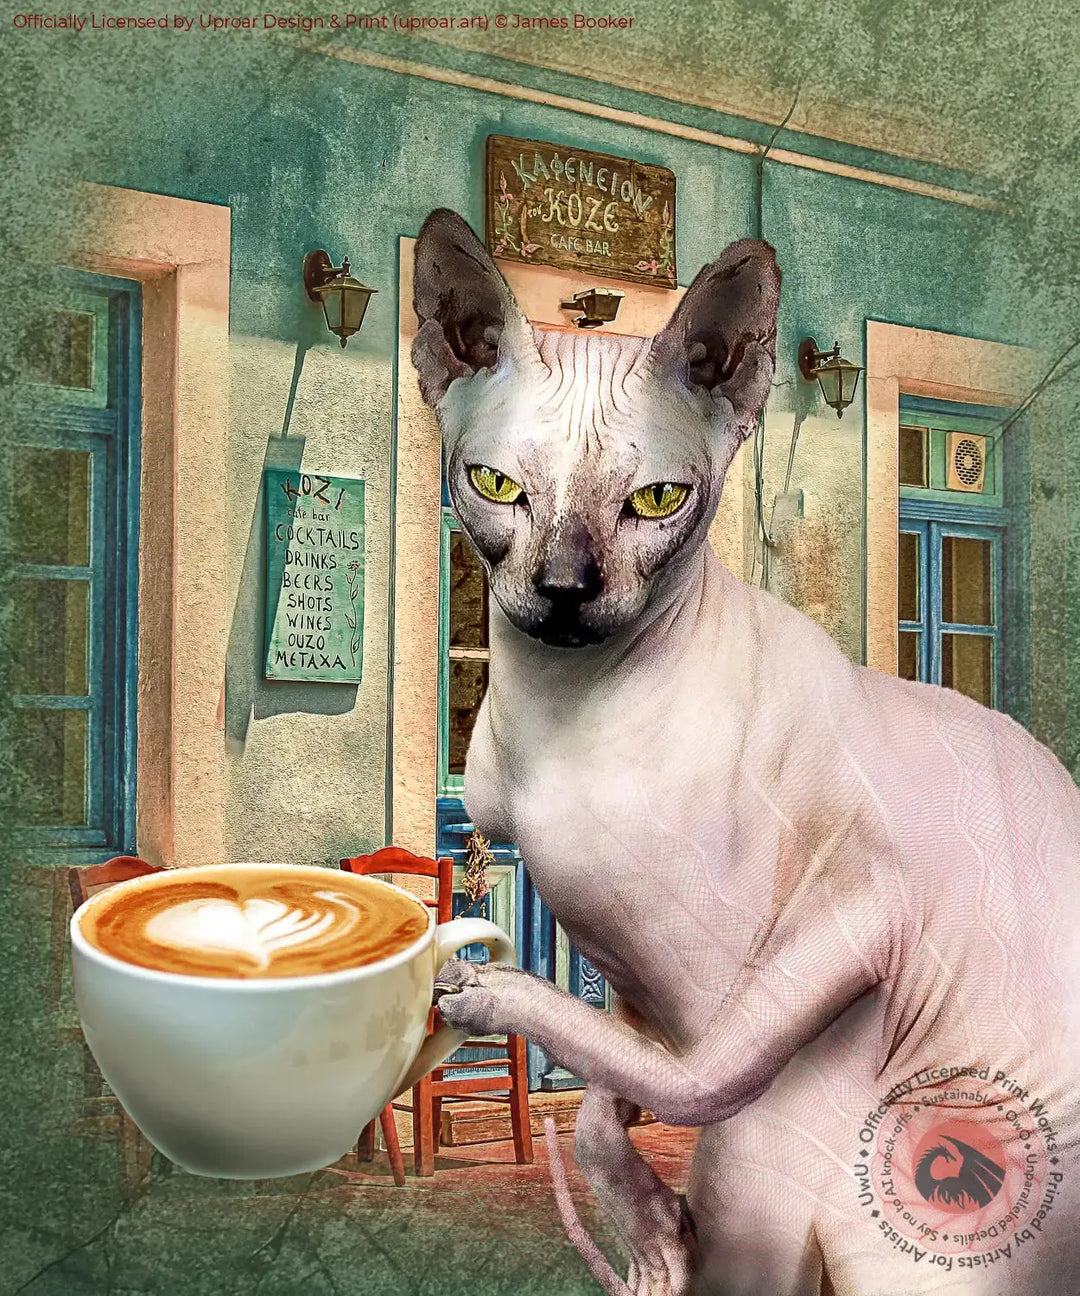 Sphynx Hairless Cat With Coffee James Booker